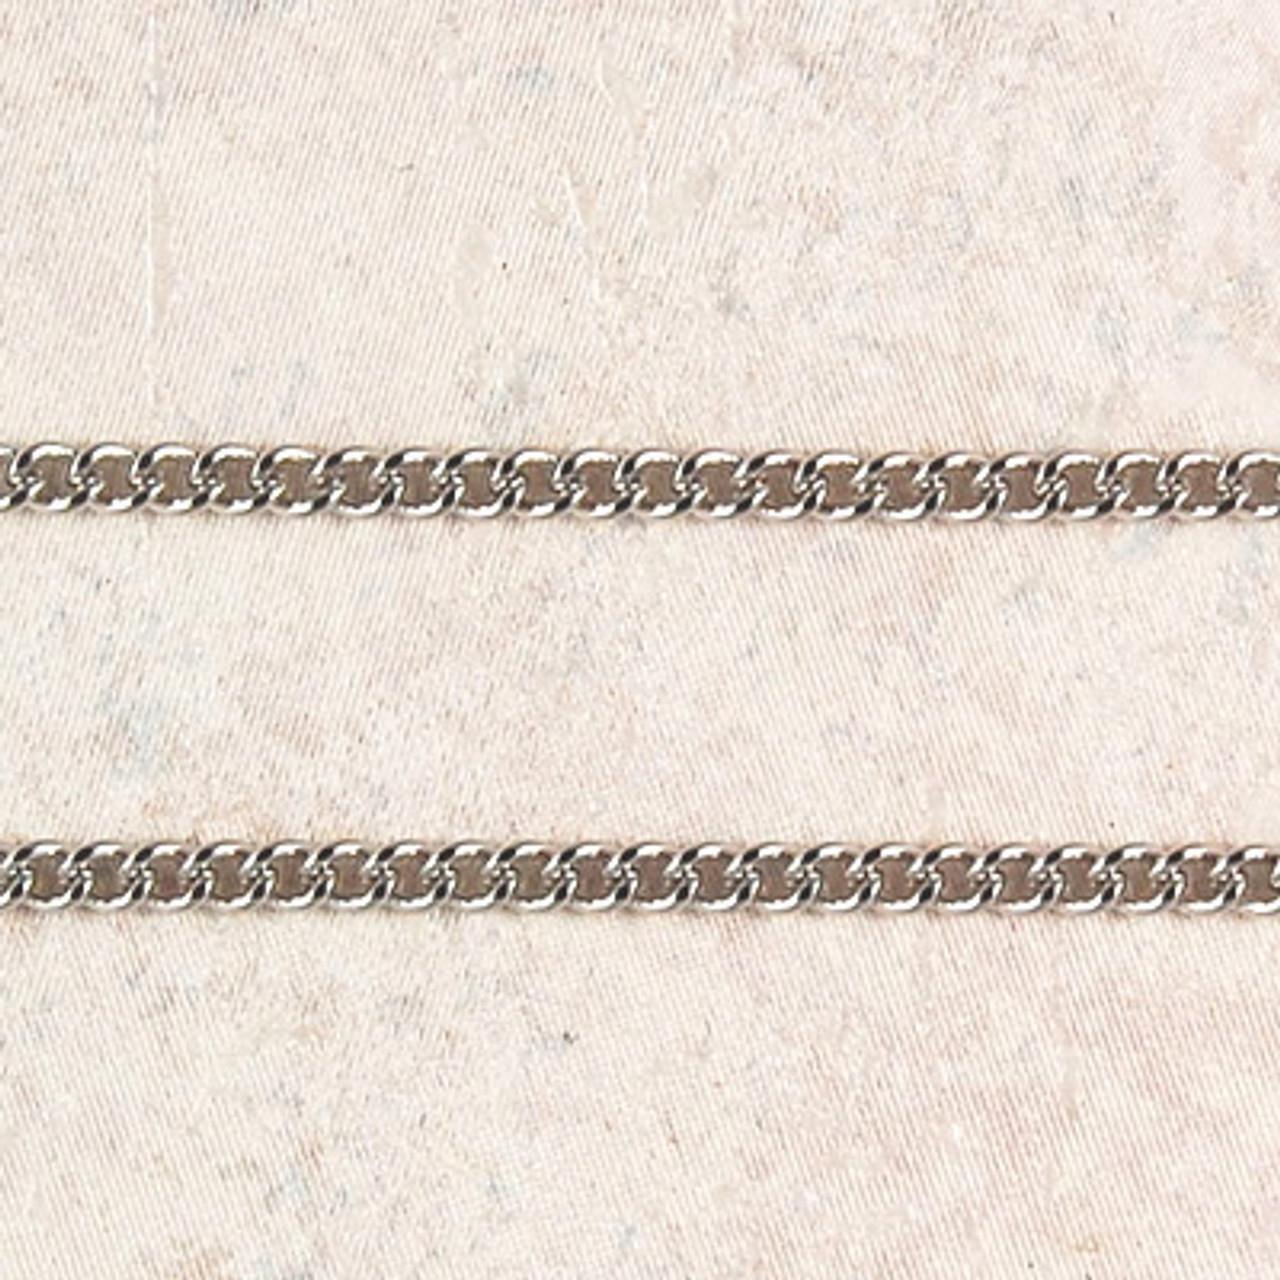 Stainless Endless Heavy Chain Size 30in L Comes Carded